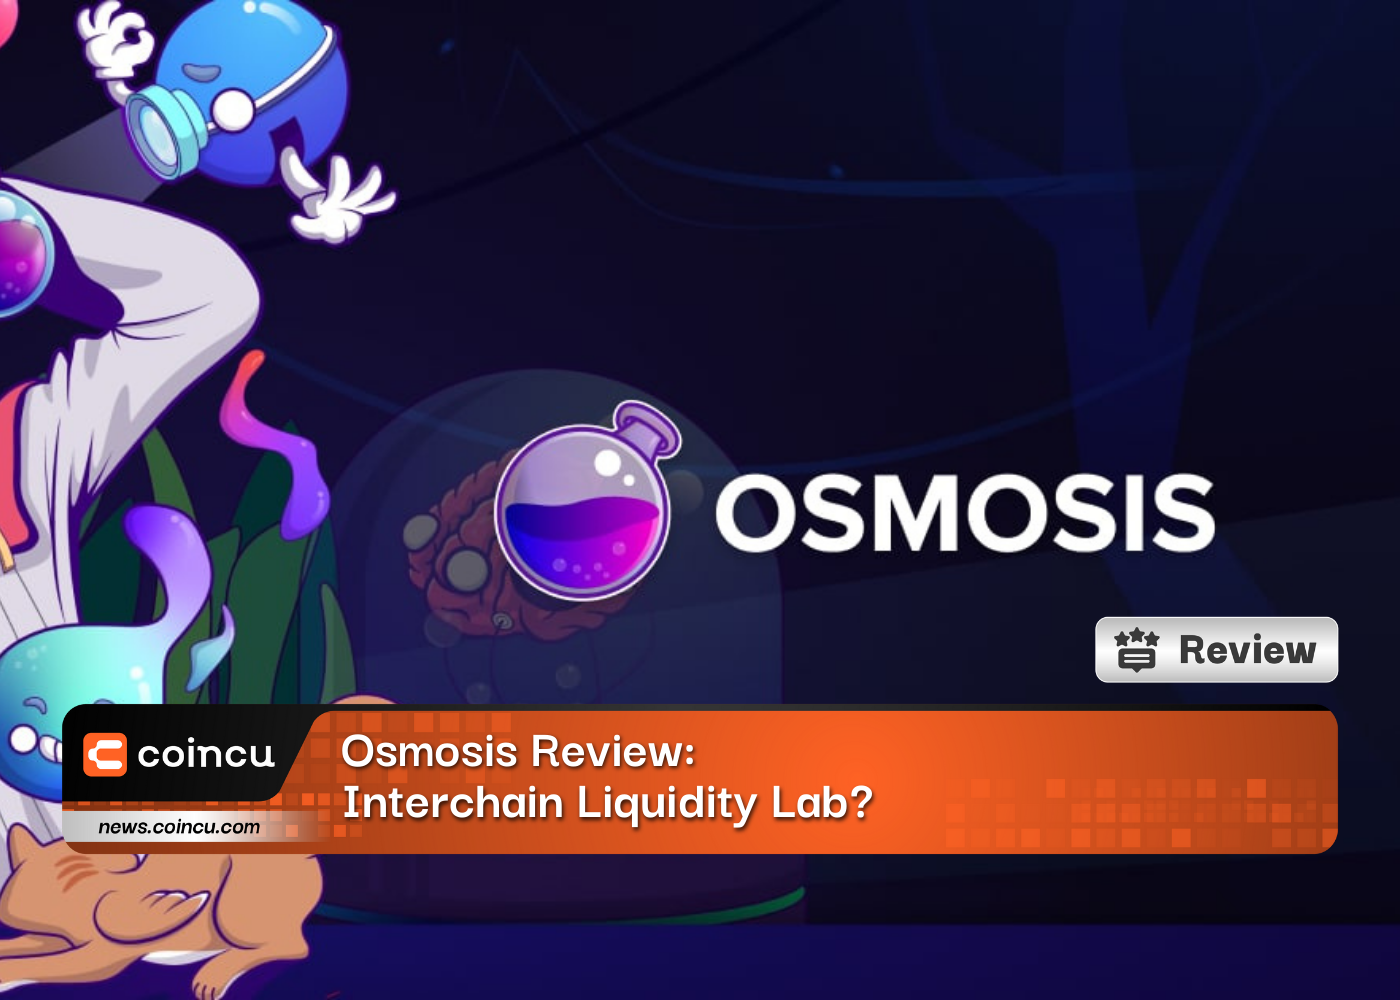 Osmosis Review